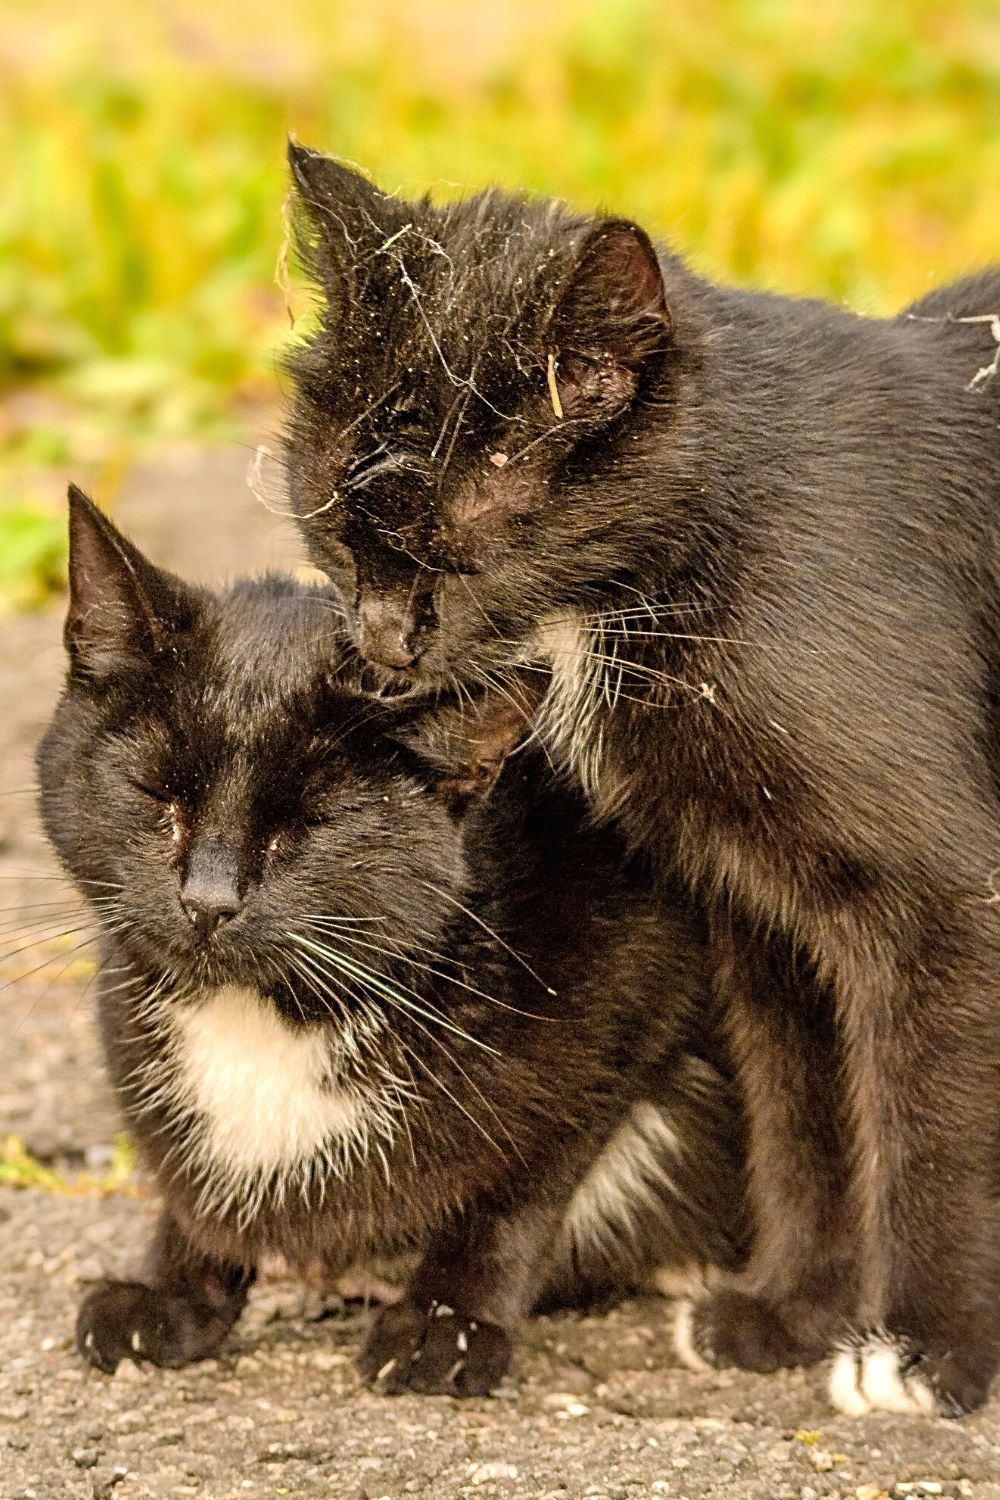 Cats show their affection for each other by grooming and cleaning their ears